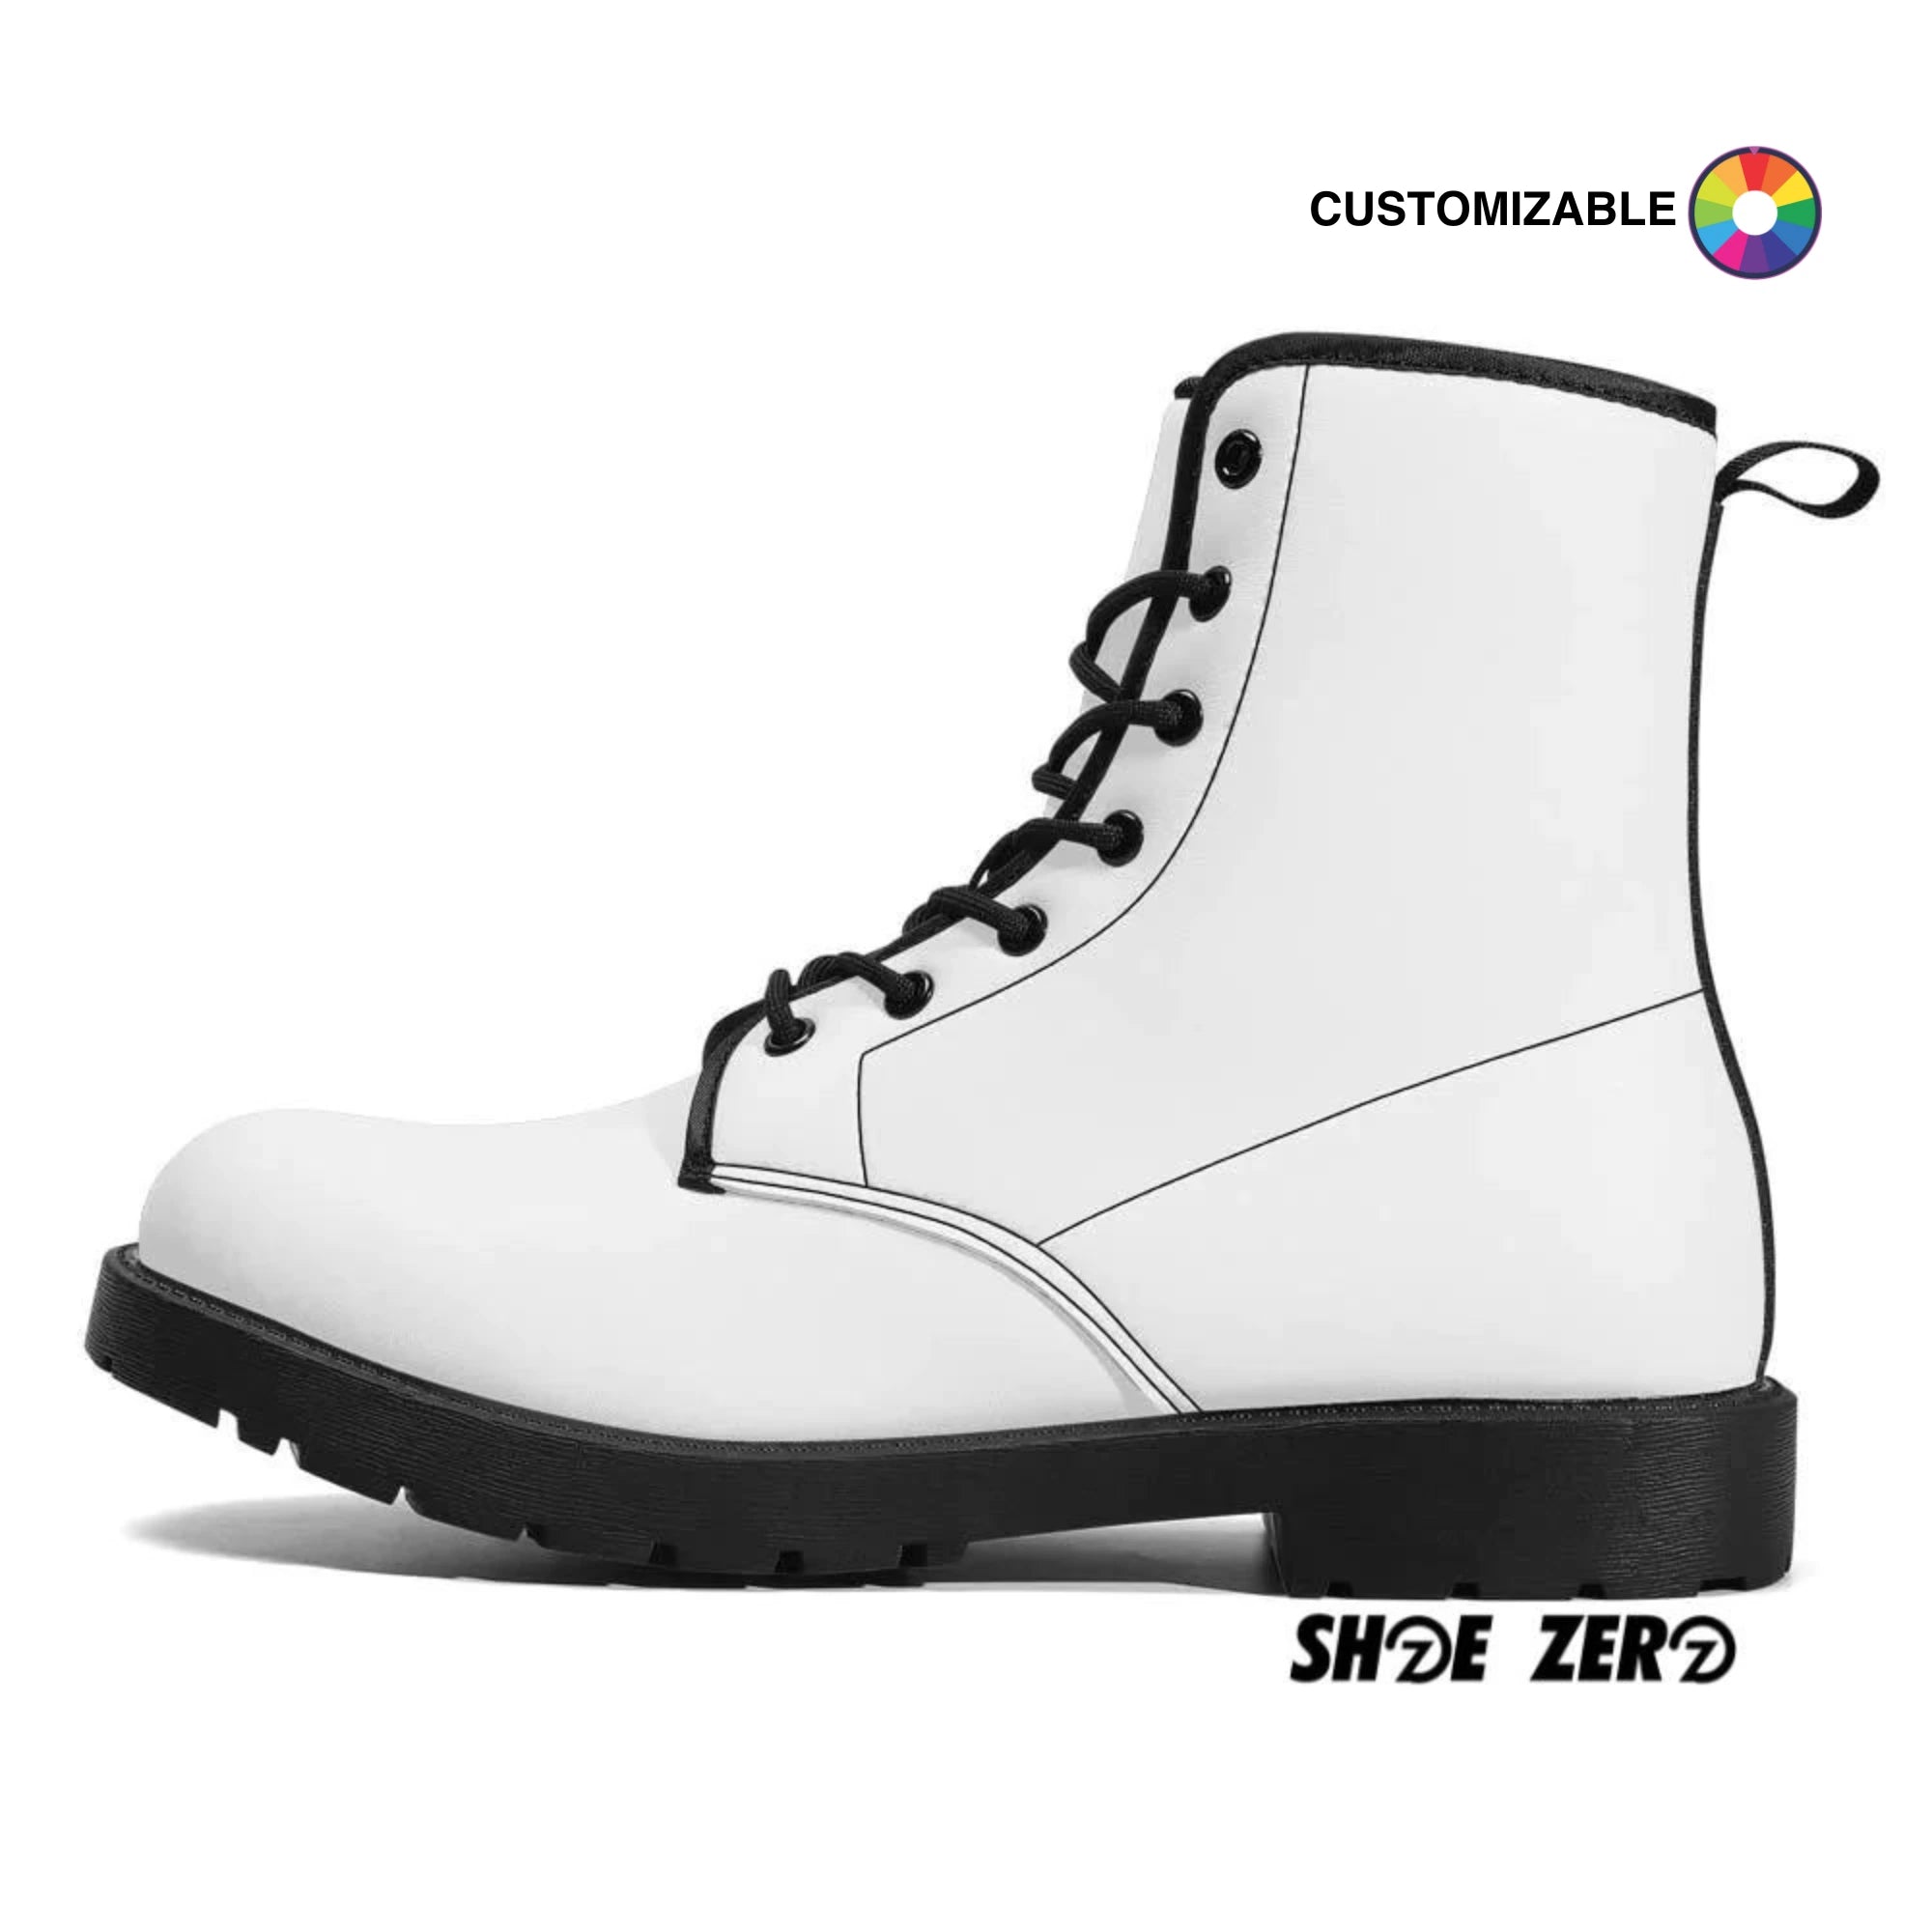 Customizable Leather Boots | Design your own | Shoe Zero